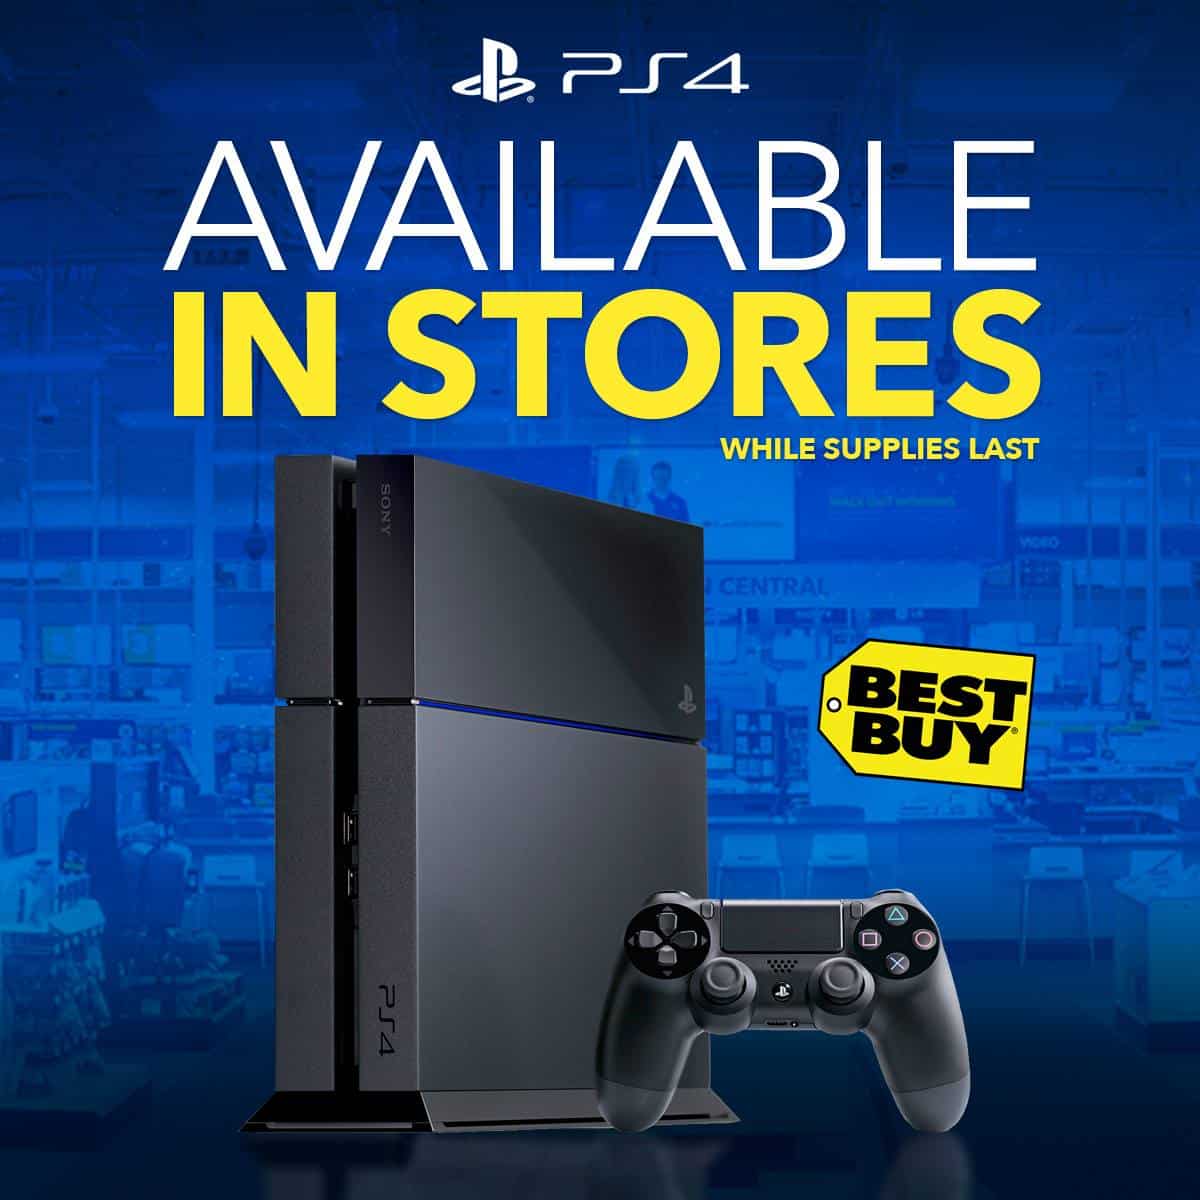 Best Buy has new shipments of PS4 in their stores (1/19/2014)! # ...